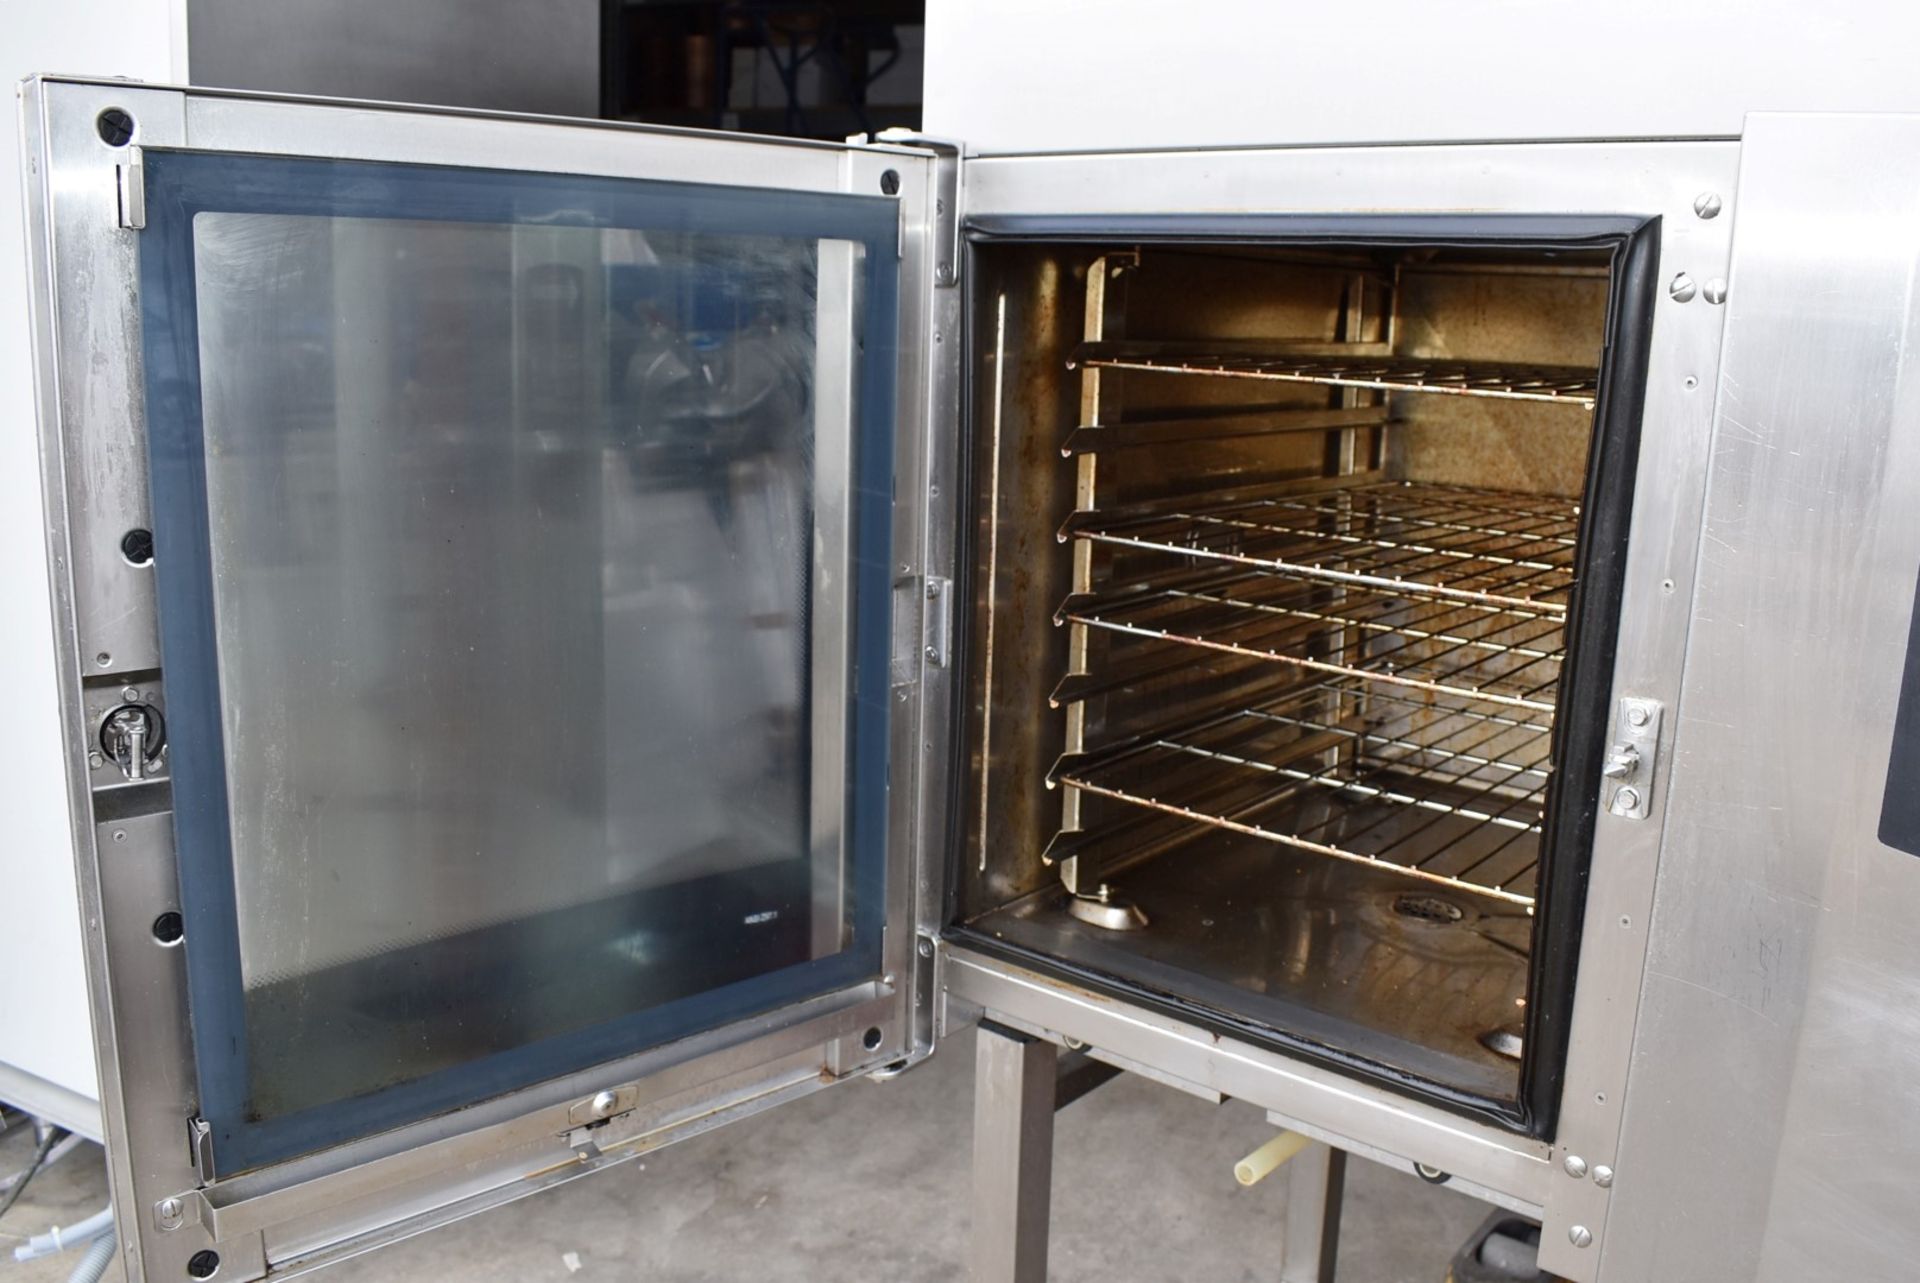 1 x Houno 6 Grid Electric Combi Oven With Stand and Extractor - 3 Phase Electric Power - Model C1.06 - Image 5 of 13